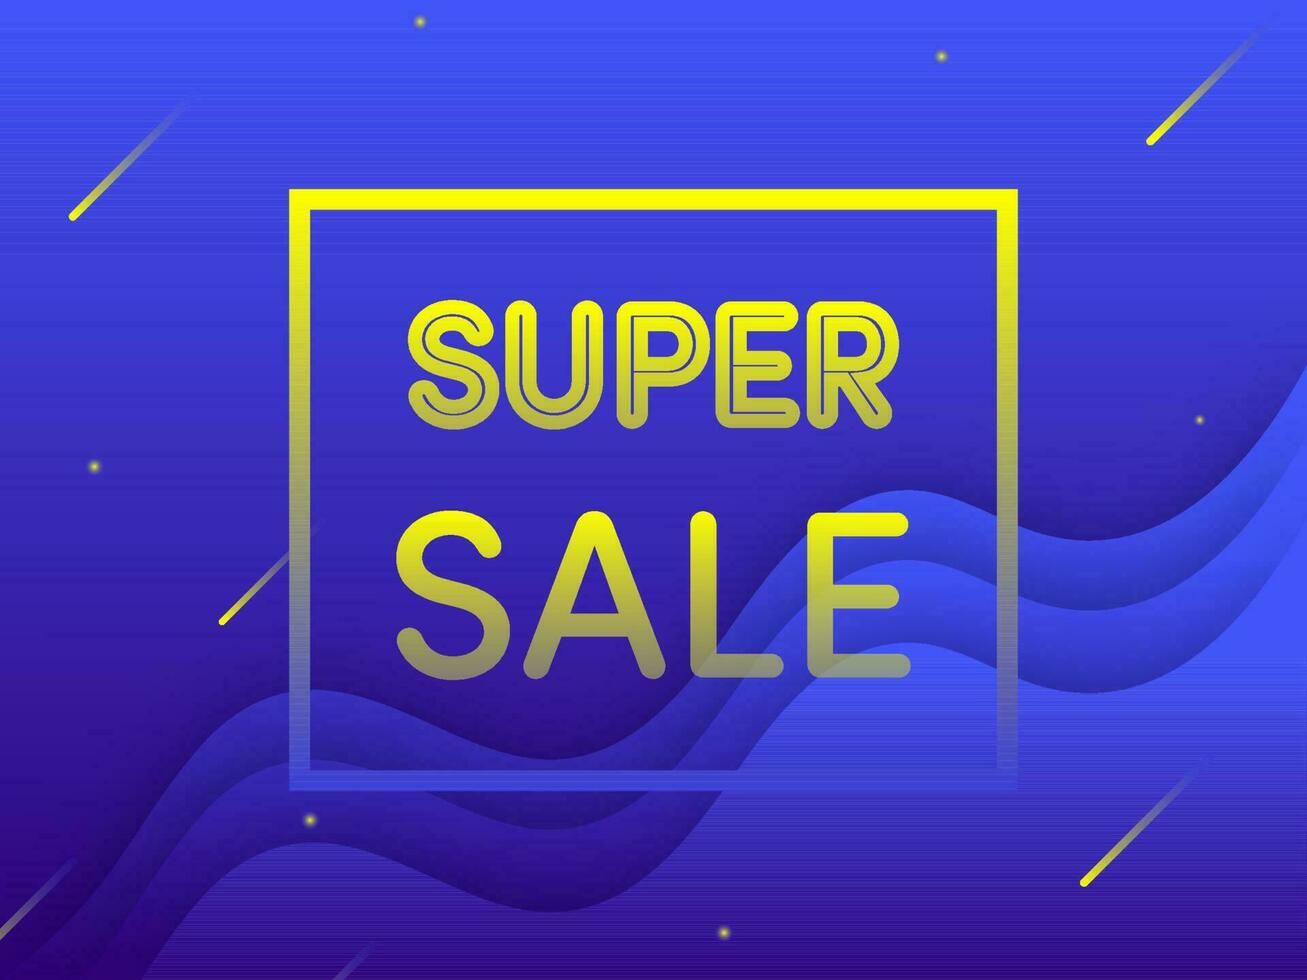 Yellow Super Sale Text On Blue Overlapping Waves Background. Can Be Used As Poster Design. vector